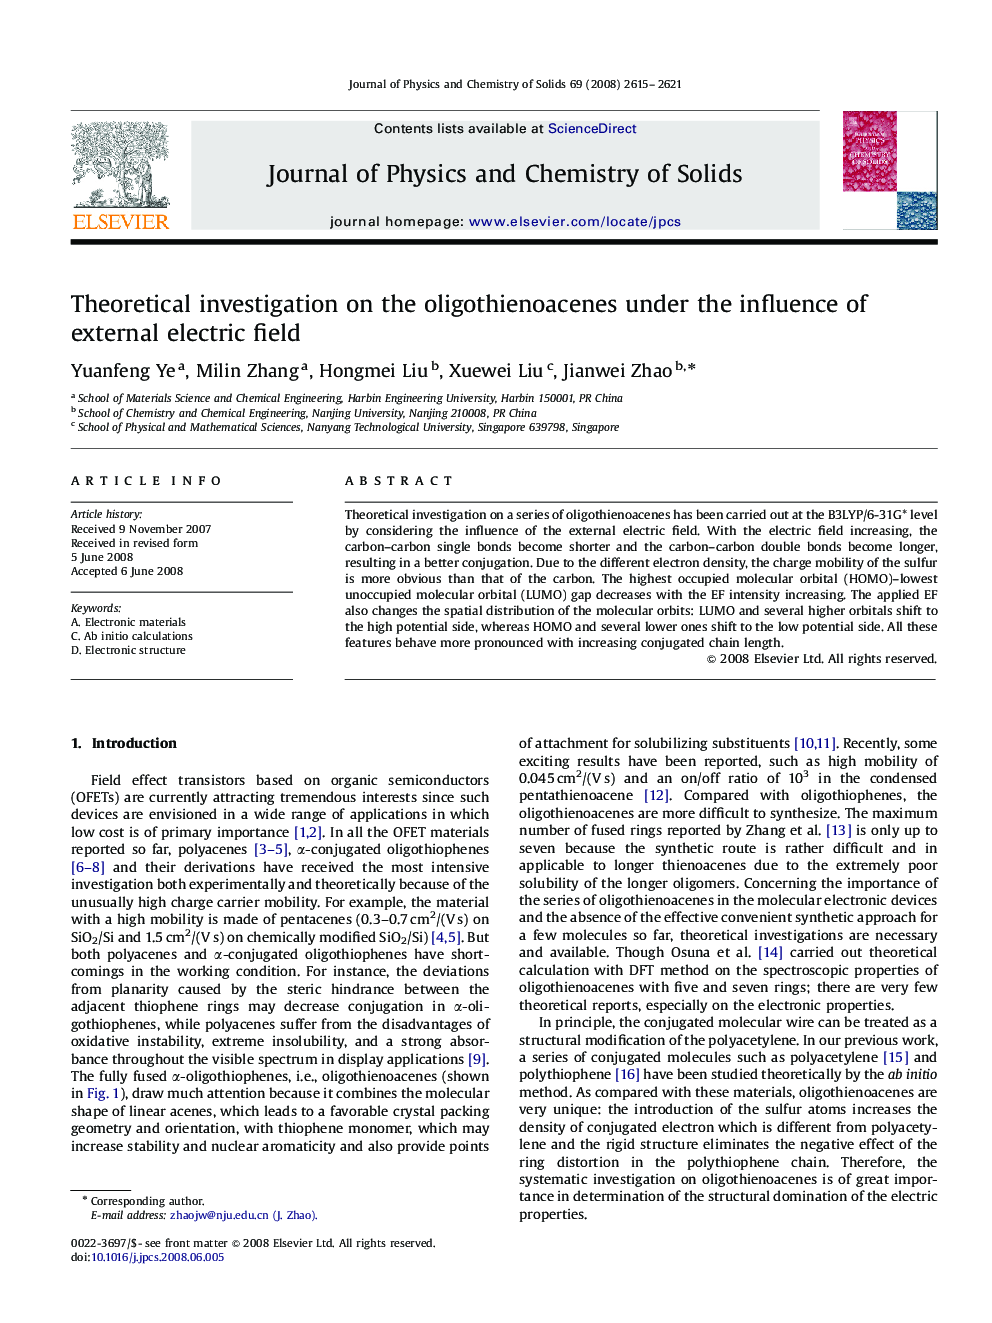 Theoretical investigation on the oligothienoacenes under the influence of external electric field